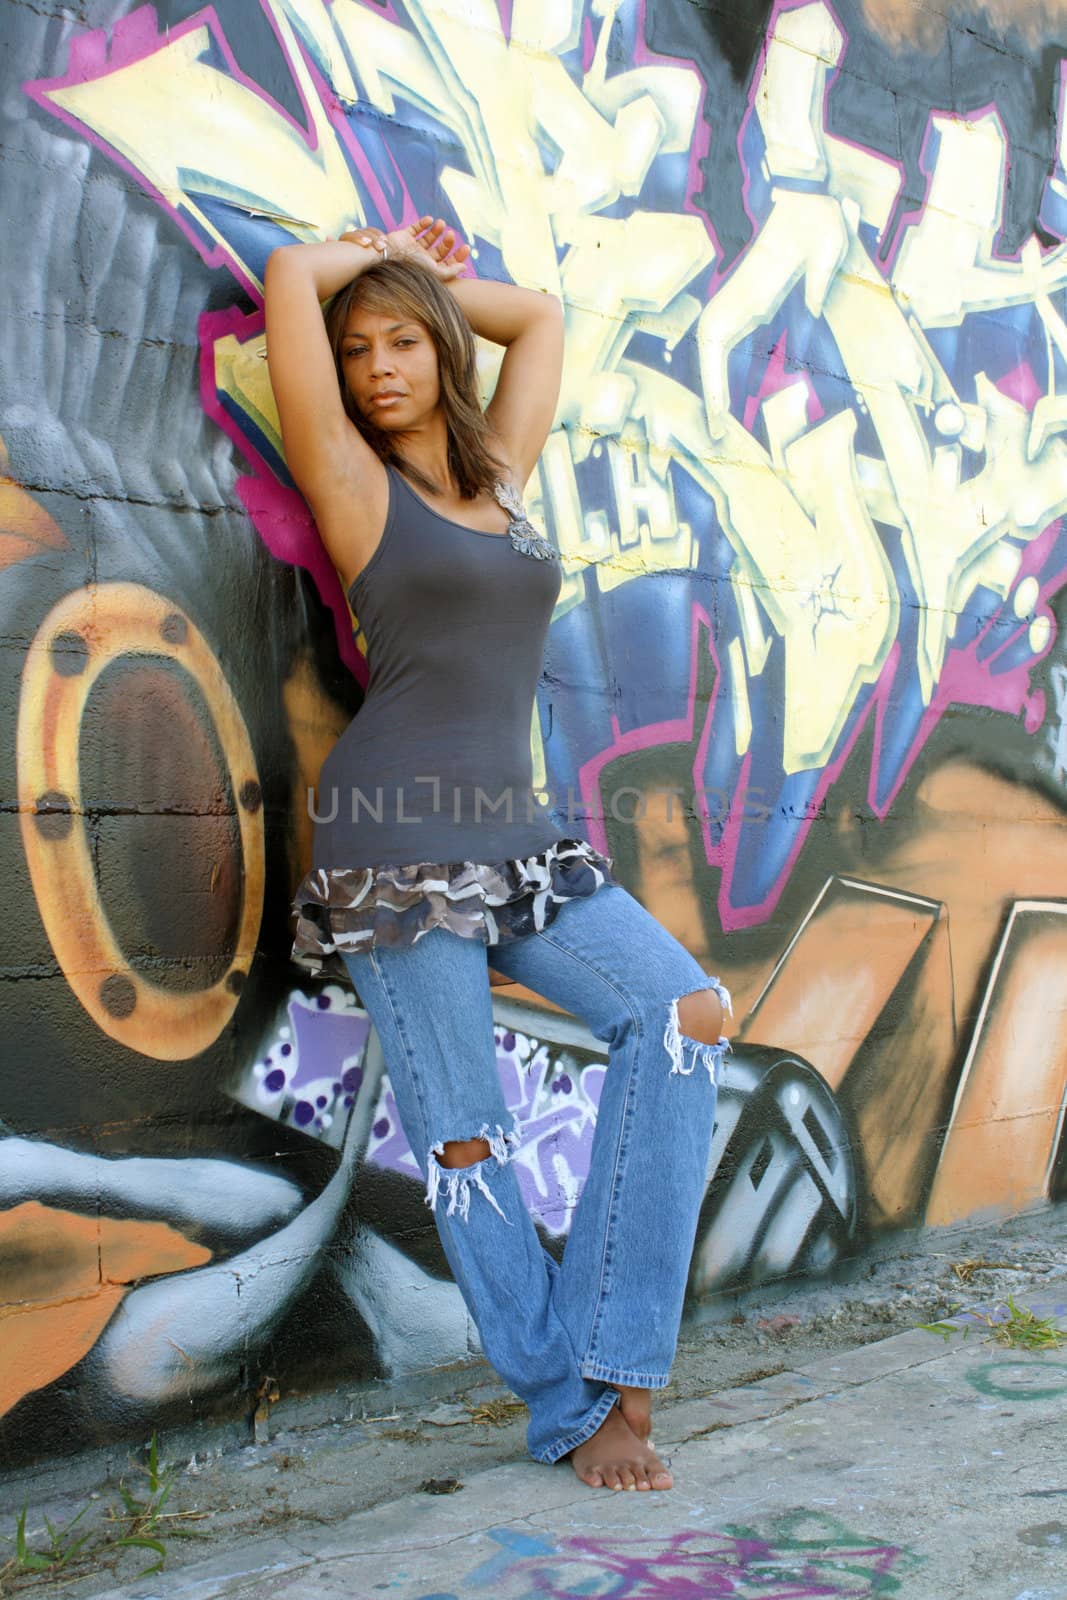 A lovely mature black woman, wearing tattered jeans, stands barefoot leaning against a wall of graffiti art 